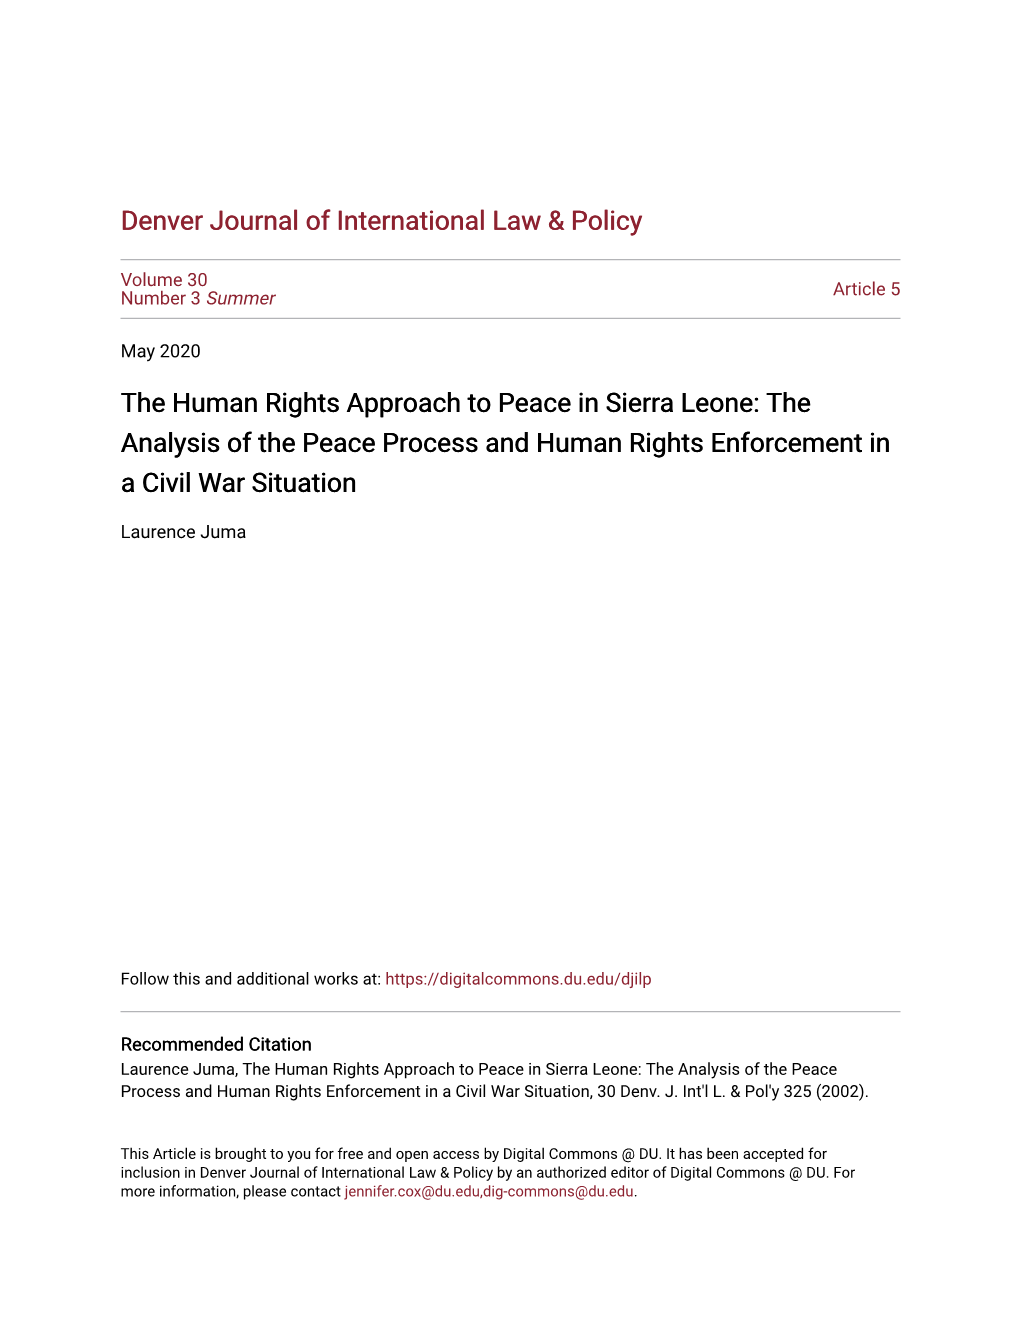 The Human Rights Approach to Peace in Sierra Leone: the Analysis of the Peace Process and Human Rights Enforcement in a Civil War Situation